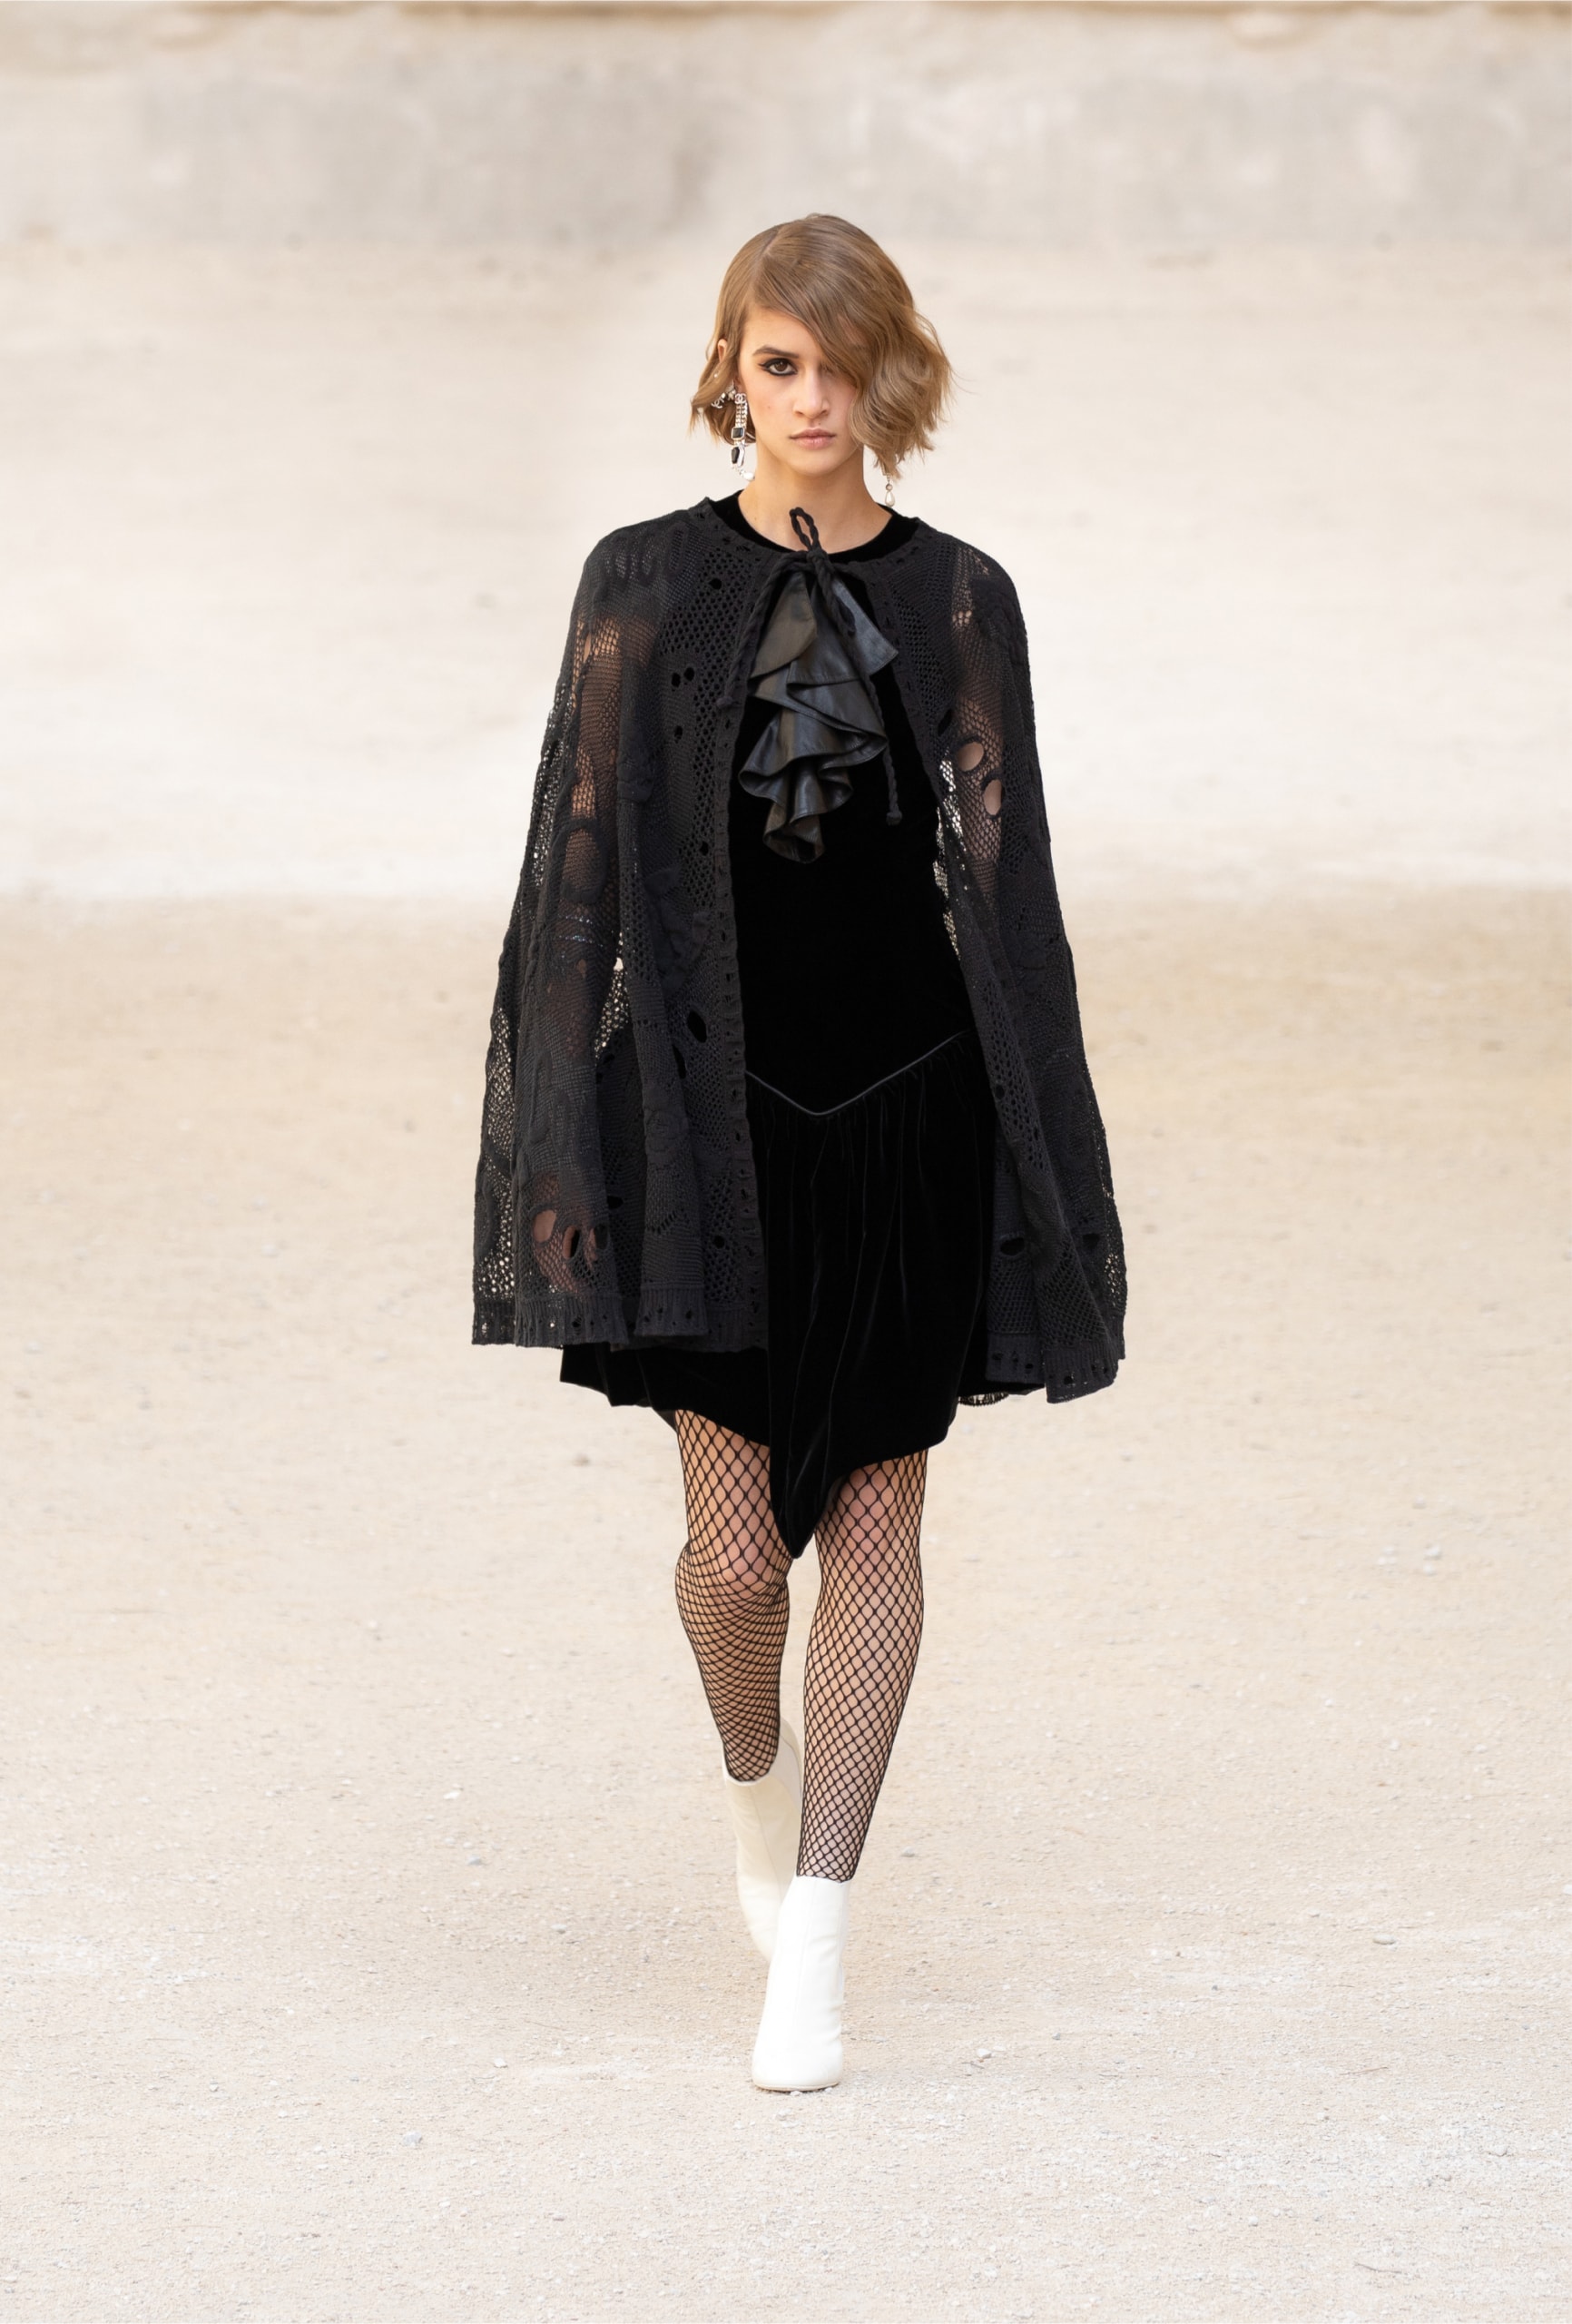 Chanel Presents Cruise 2021 Show in Provence